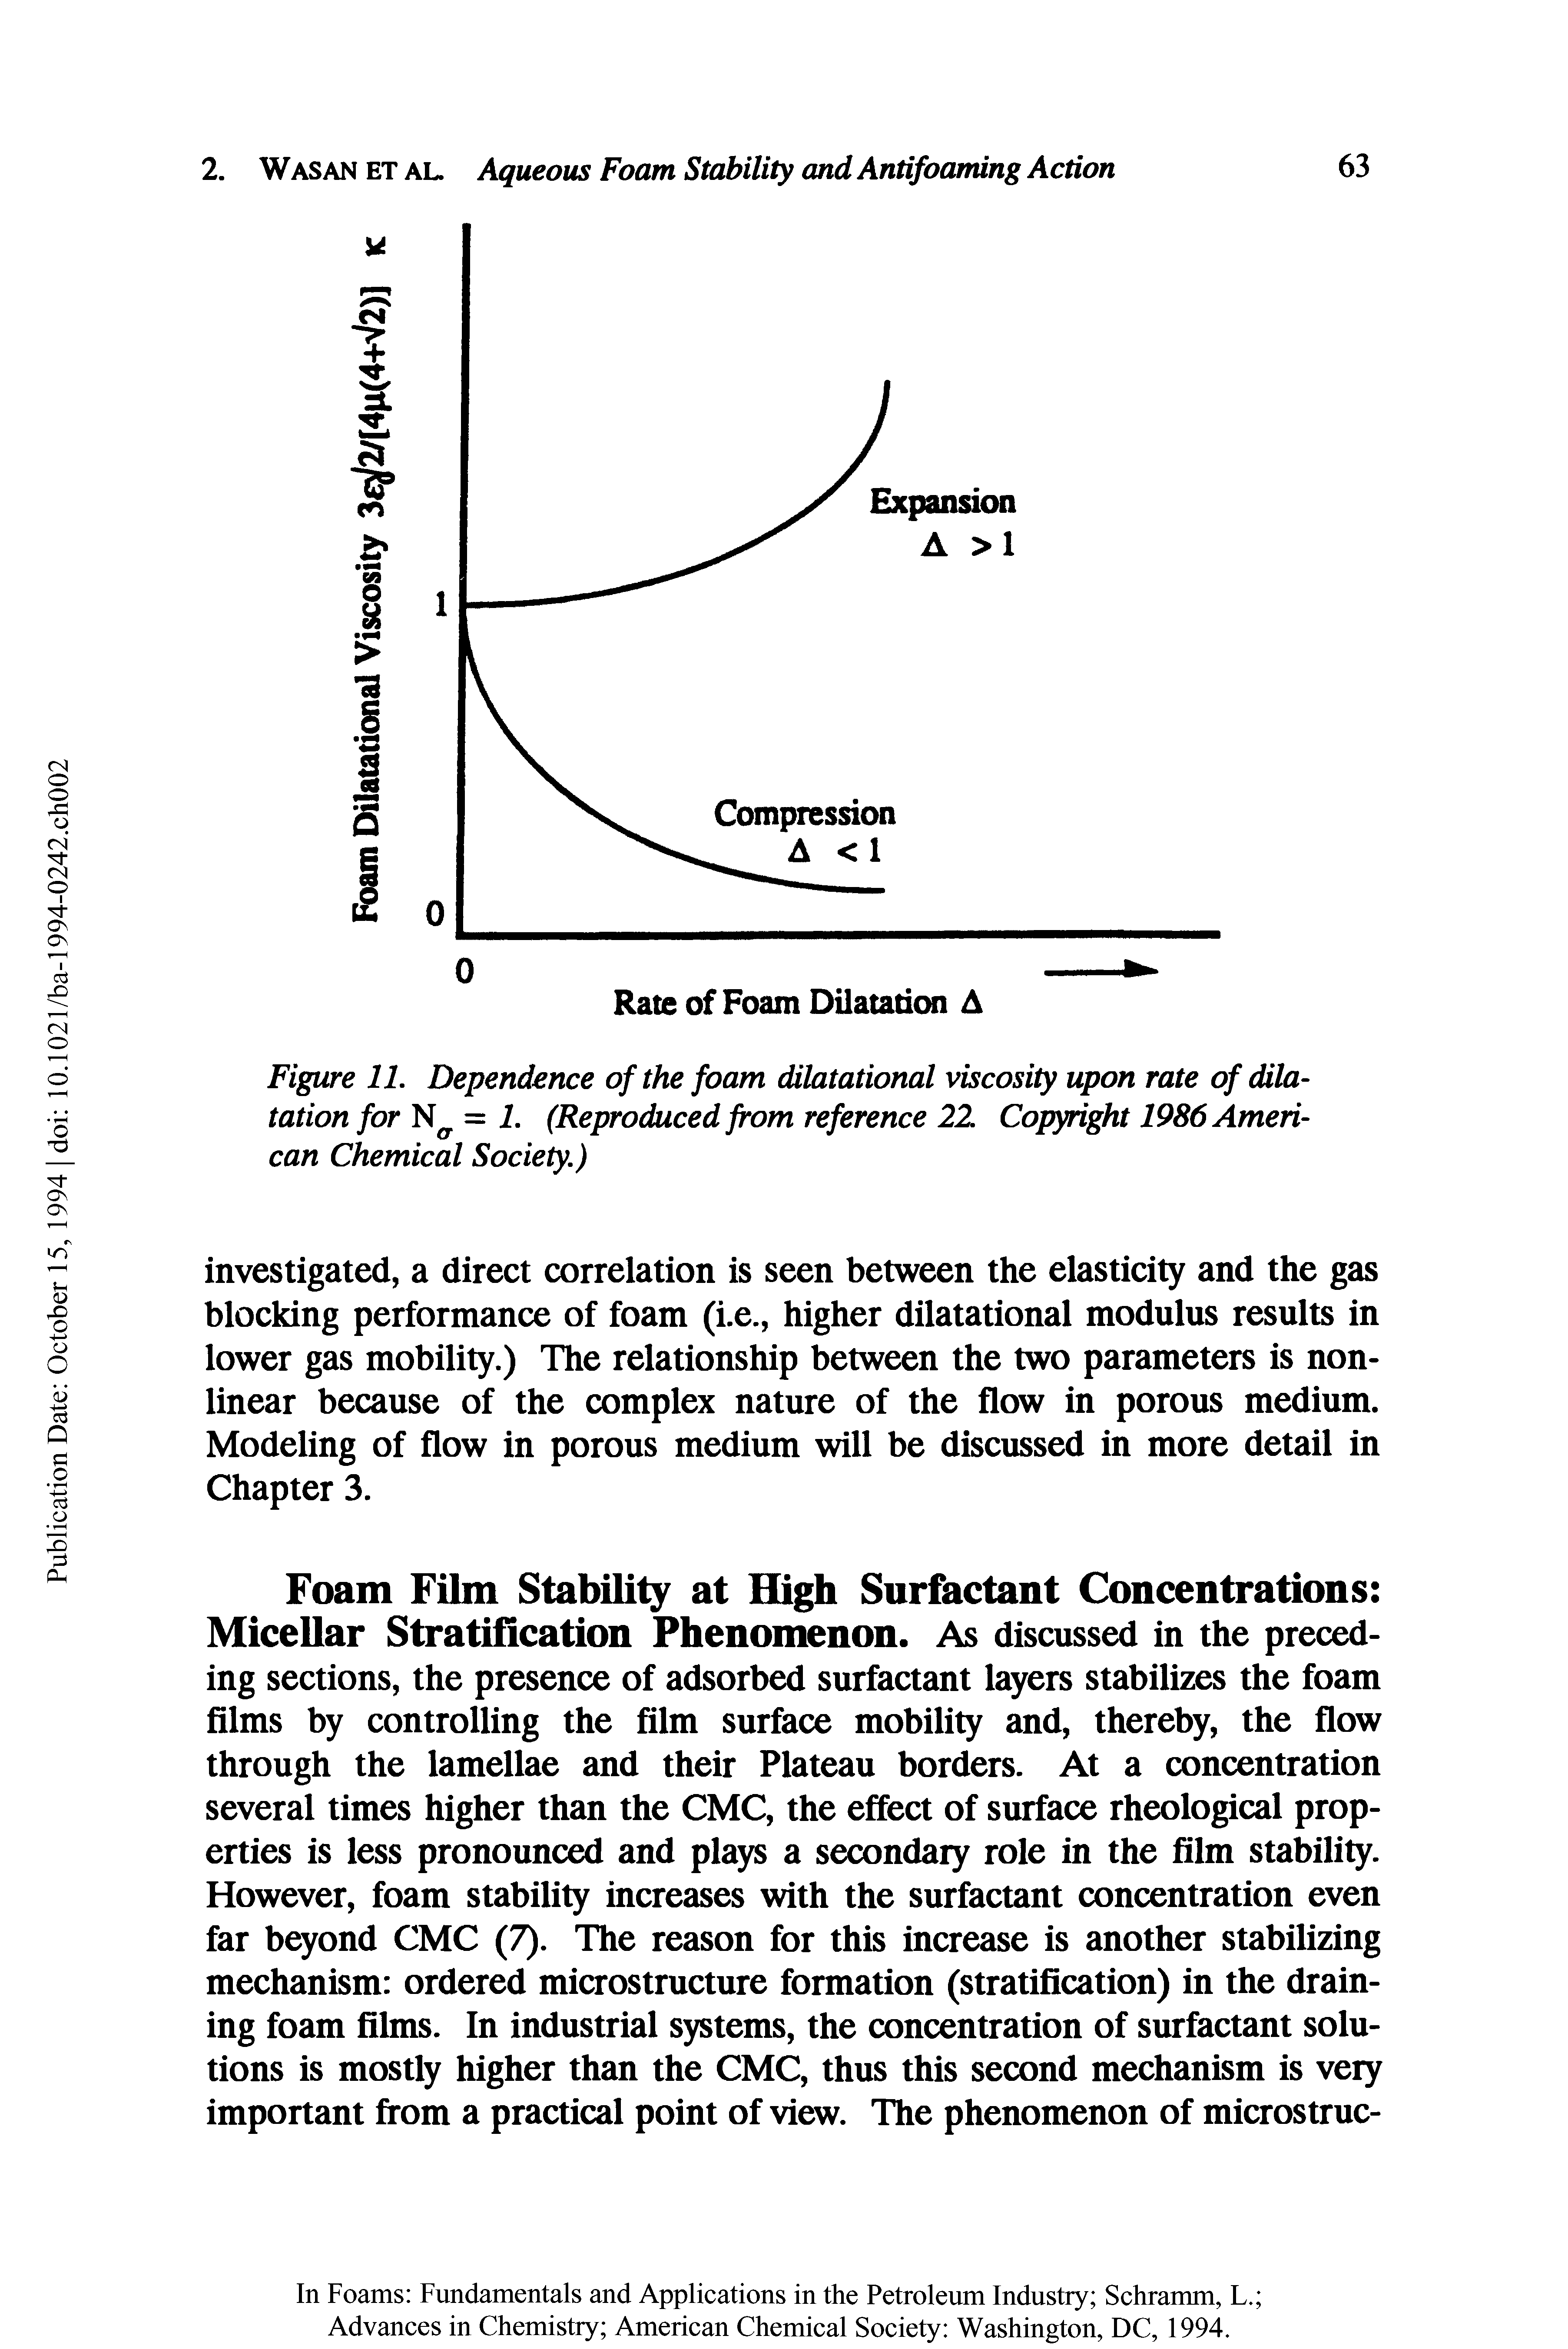 Figure 11. Dependence of the foam dilatational viscosity upon rate of dilatation for = 1. (Reproduced from reference 22 Copyright 1986 American Chemical Society.)...